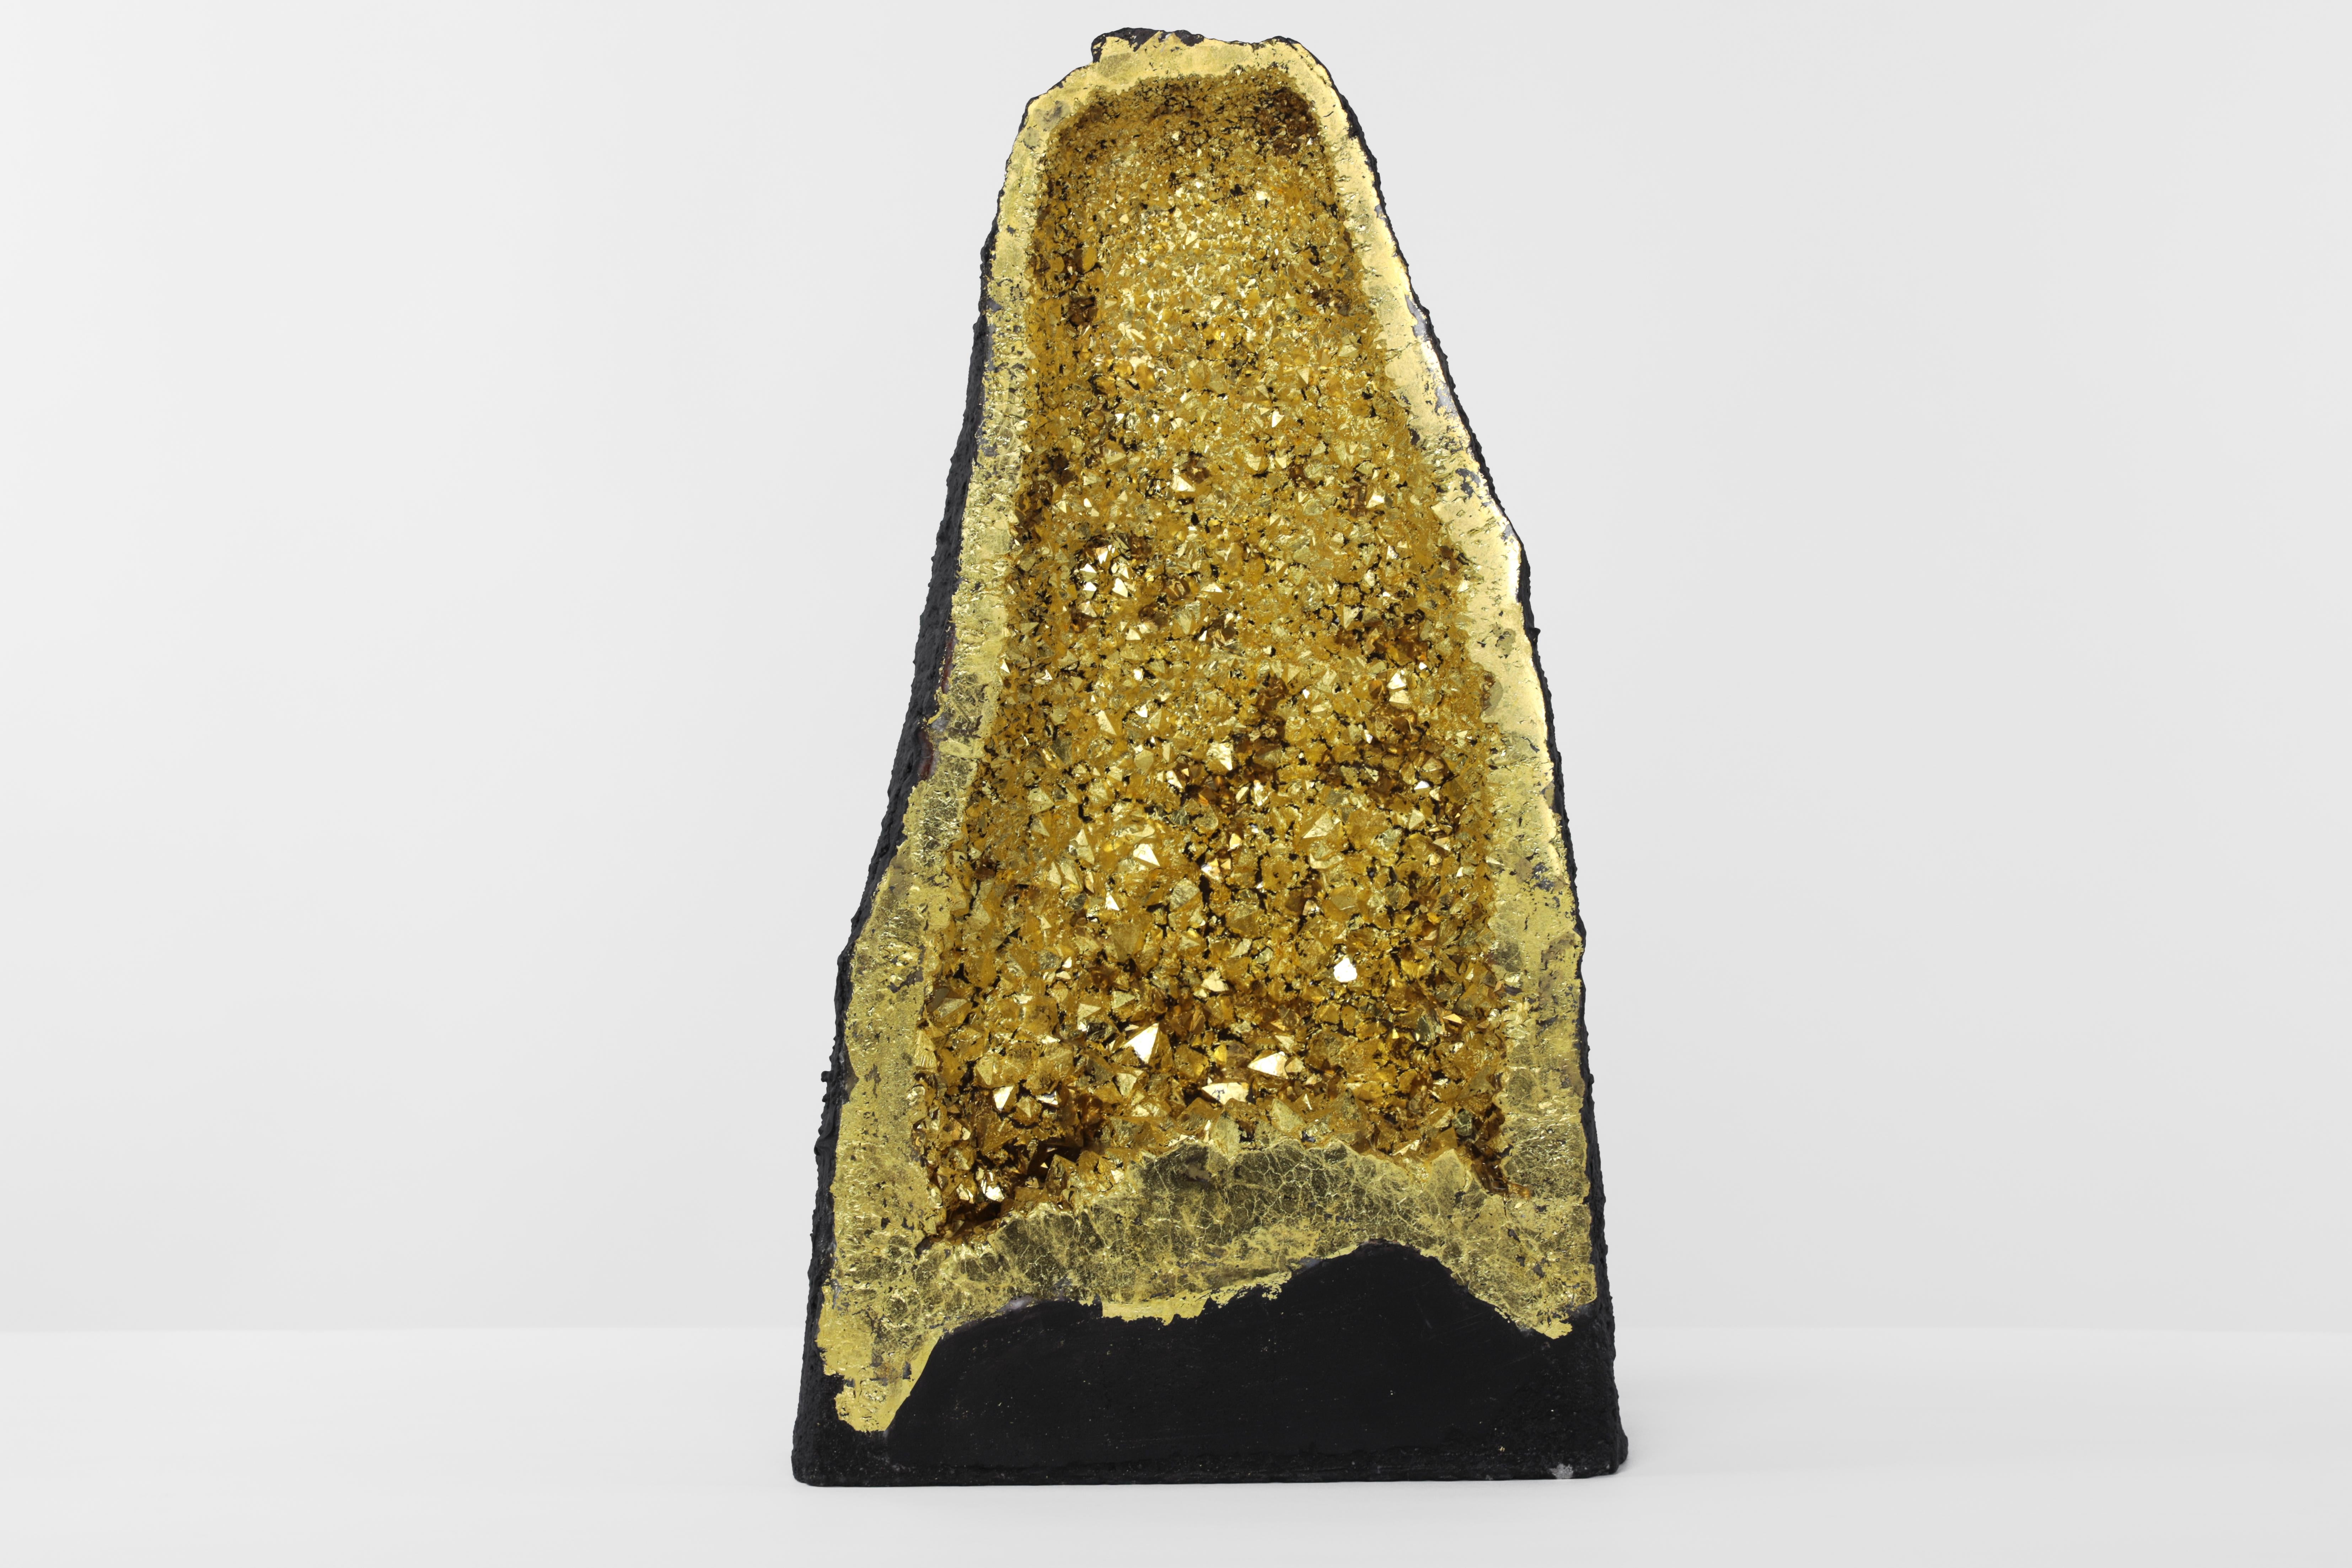 It's easy to imagine walking through a cave of shiny gold when gazing into the 22K gilt crystal geode cathedral. Like the ancient Japanese Gazing stone used for meditation and focusing on breathe, the Gazing Golden Cathedral acts the same. Sit and